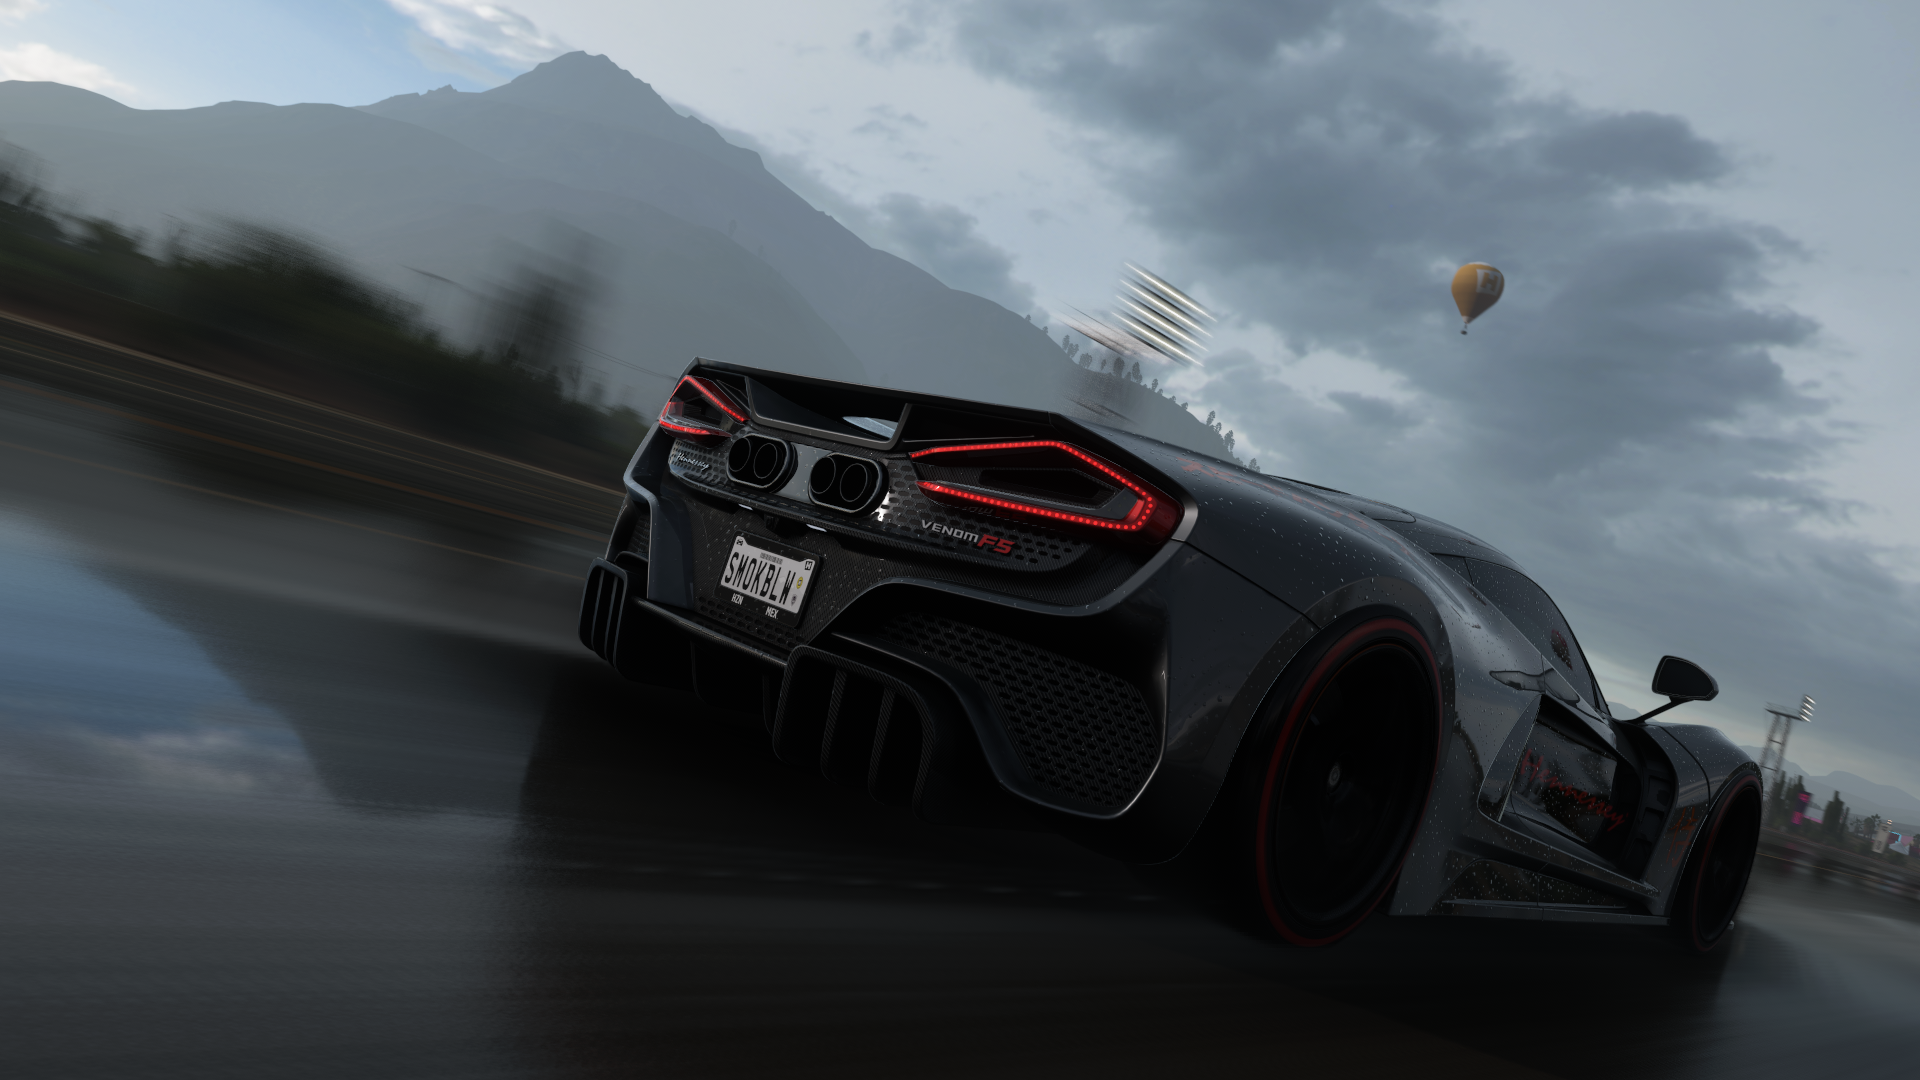 General 1920x1080 Forza Horizon 5 screen shot PC gaming Hennessey American cars Hypercar video games PlaygroundGames Hennessey Venom F5 rear view licence plates sky clouds CGI hot air balloons taillights road reflection video game art mountains